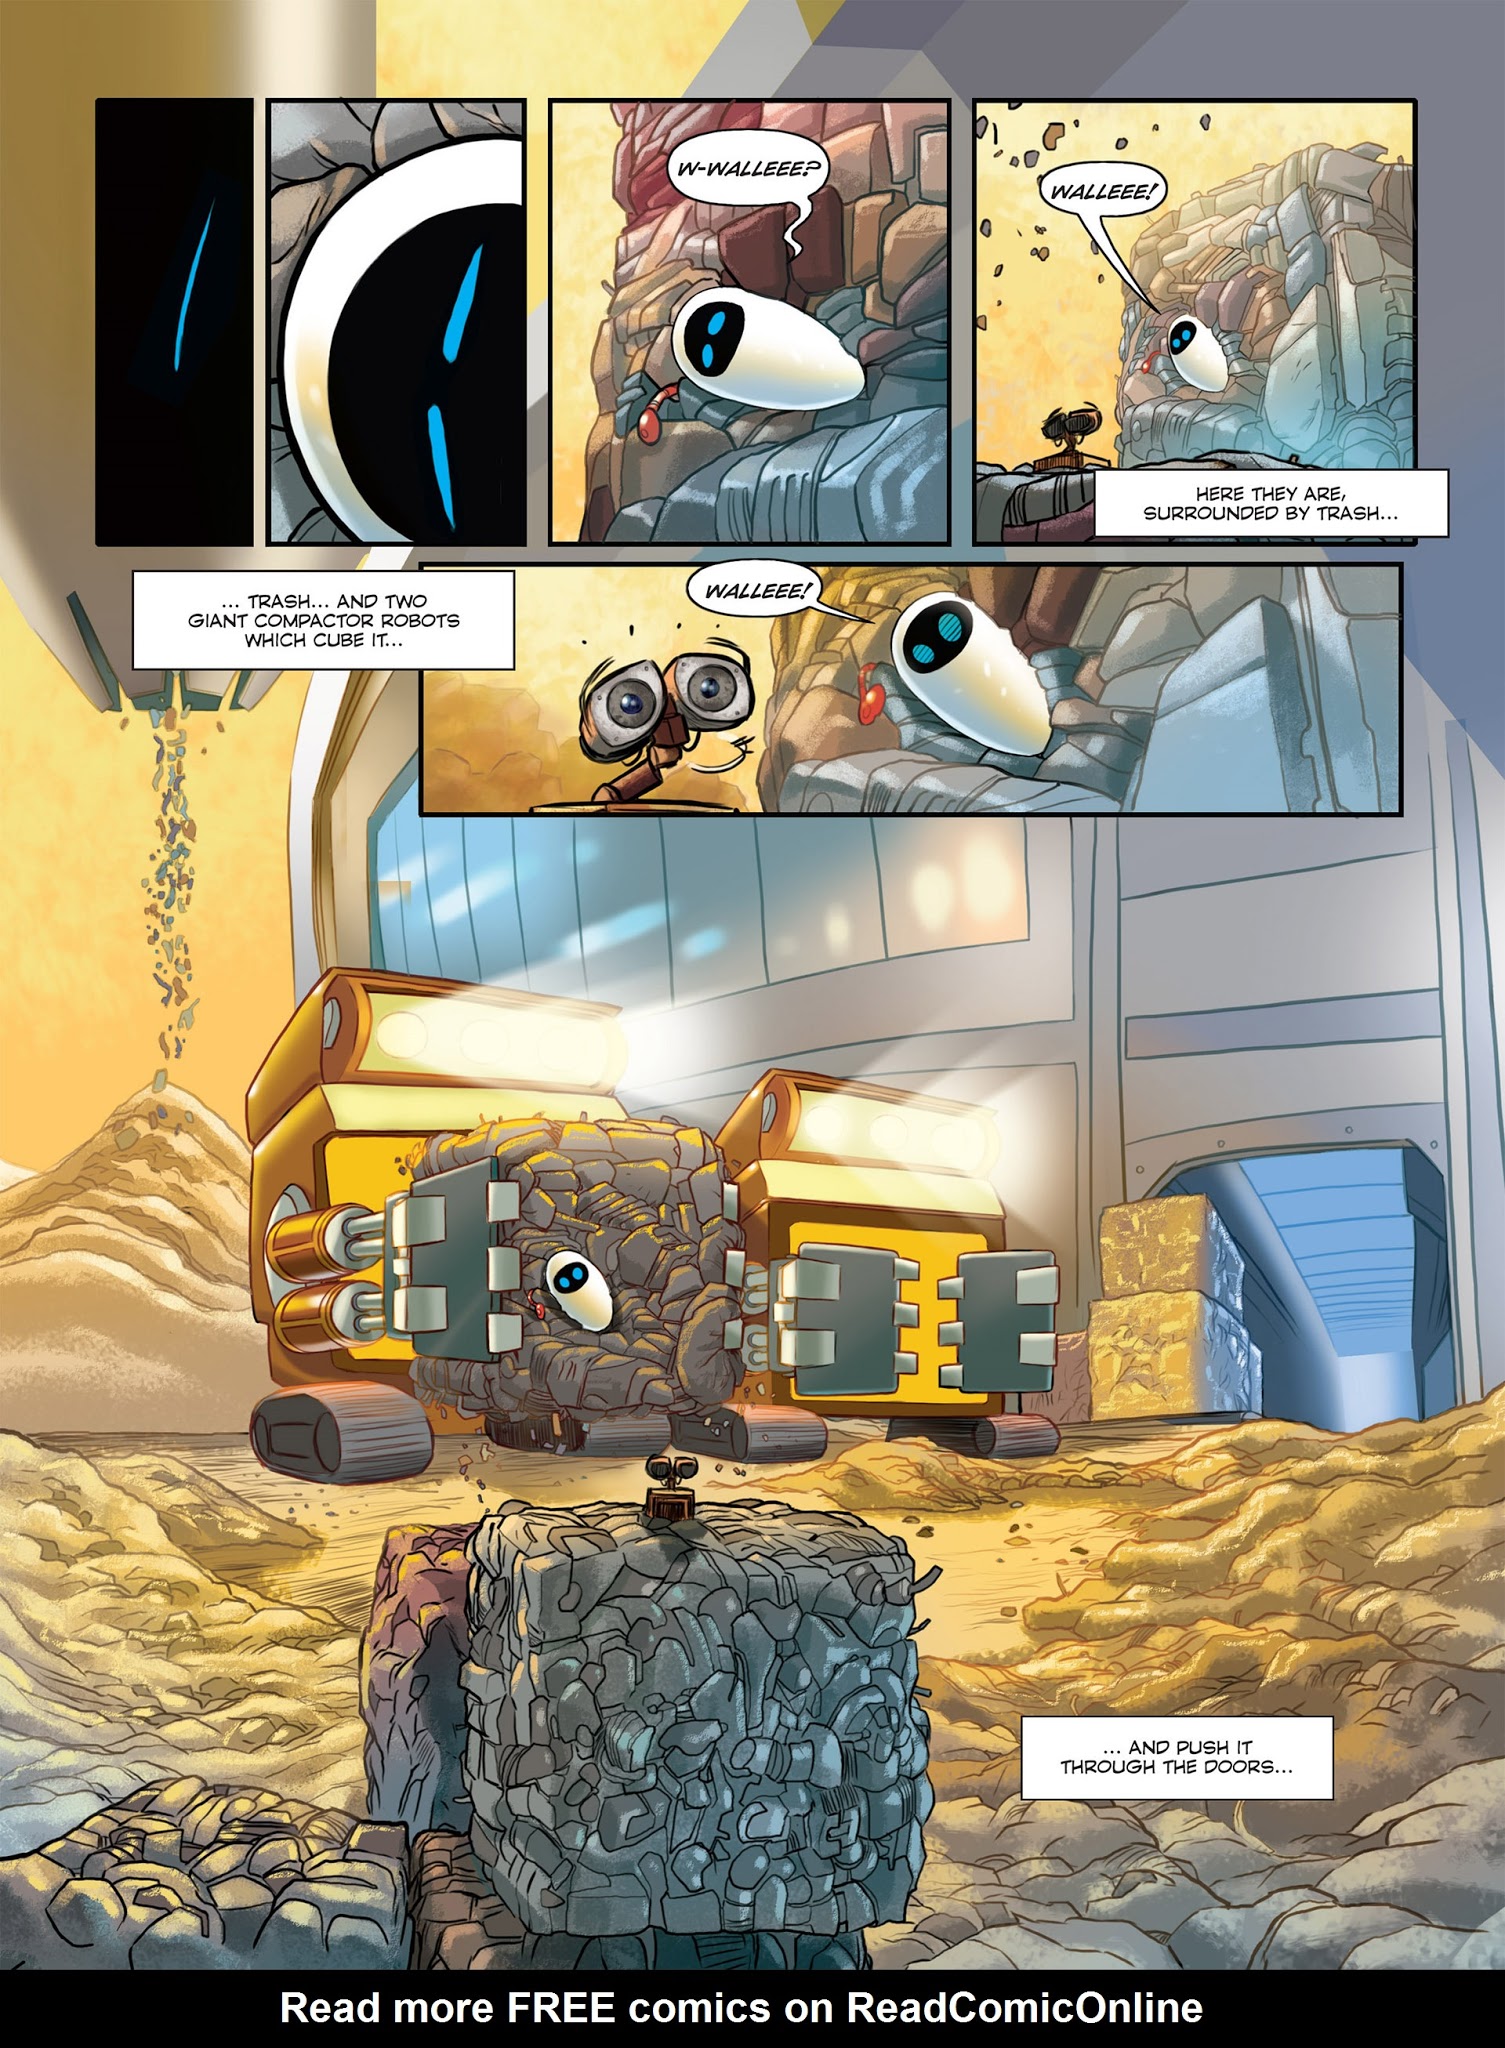 Read online WALL-E comic -  Issue # Full - 37